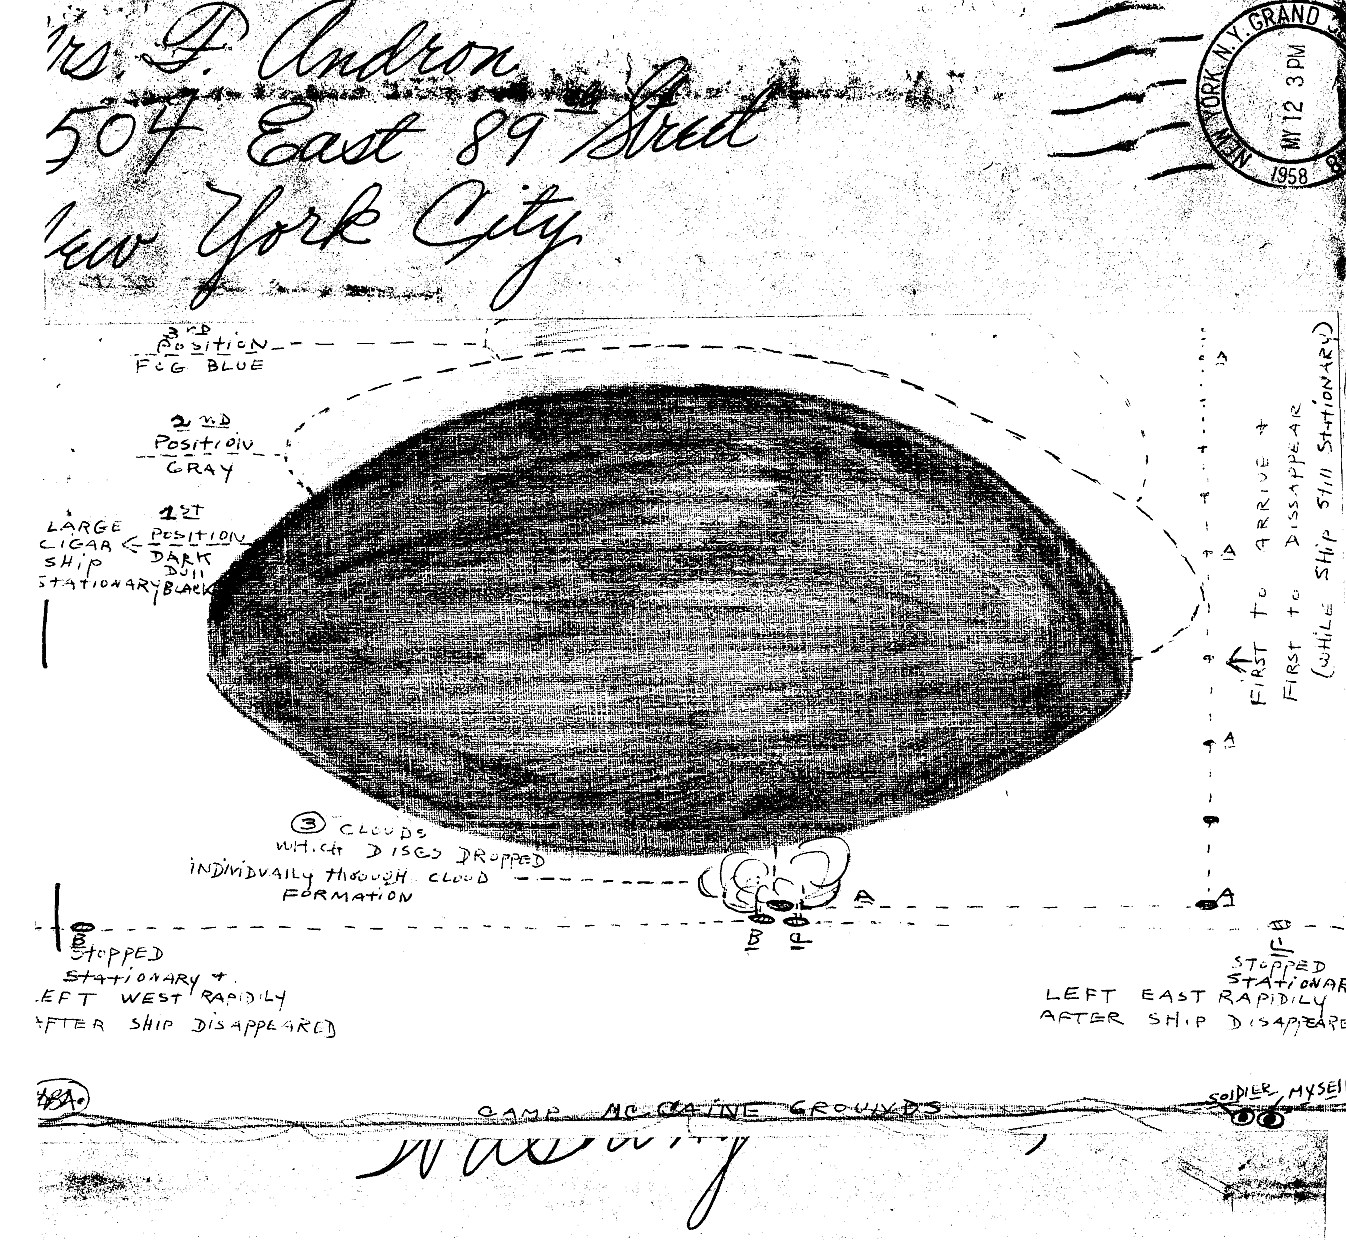 UFO Sighting 1944, Grenada MS, As reported to NICAP in 1958